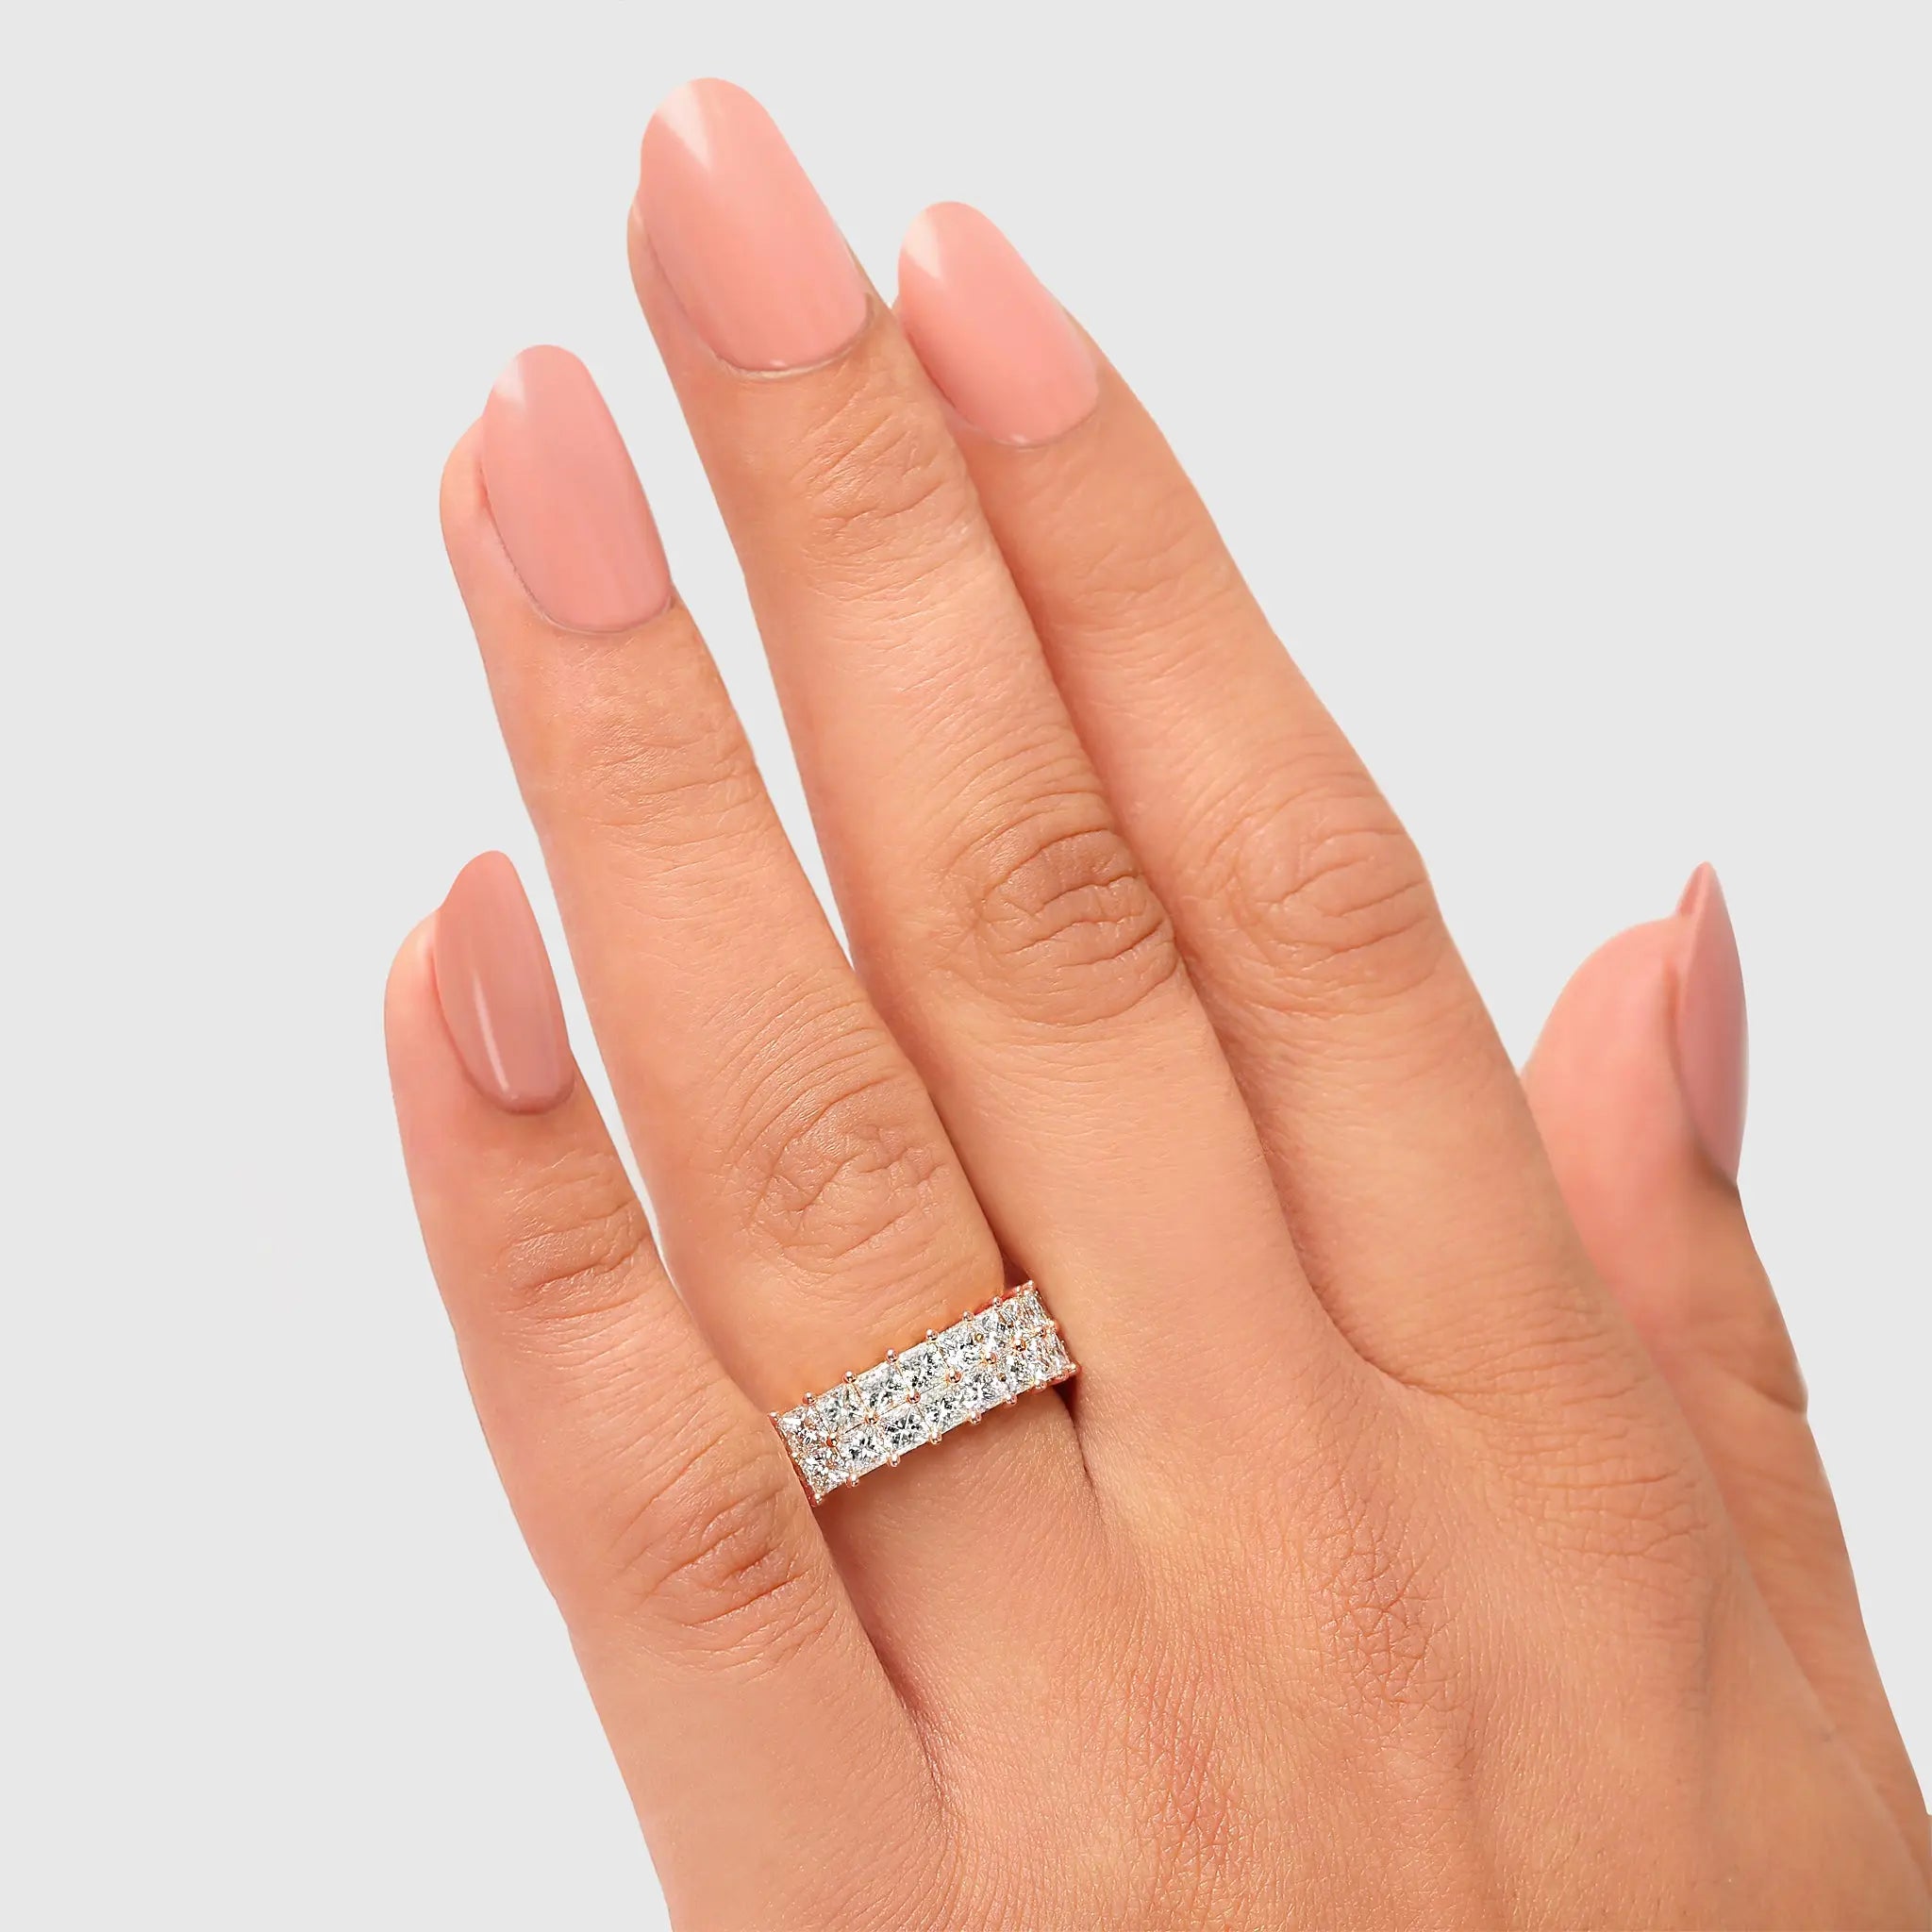 Shimansky - Women Wearing the My Girl 2 Row Full Eternity Diamond Ring 4.00ct Crafted in 18K Rose Gold